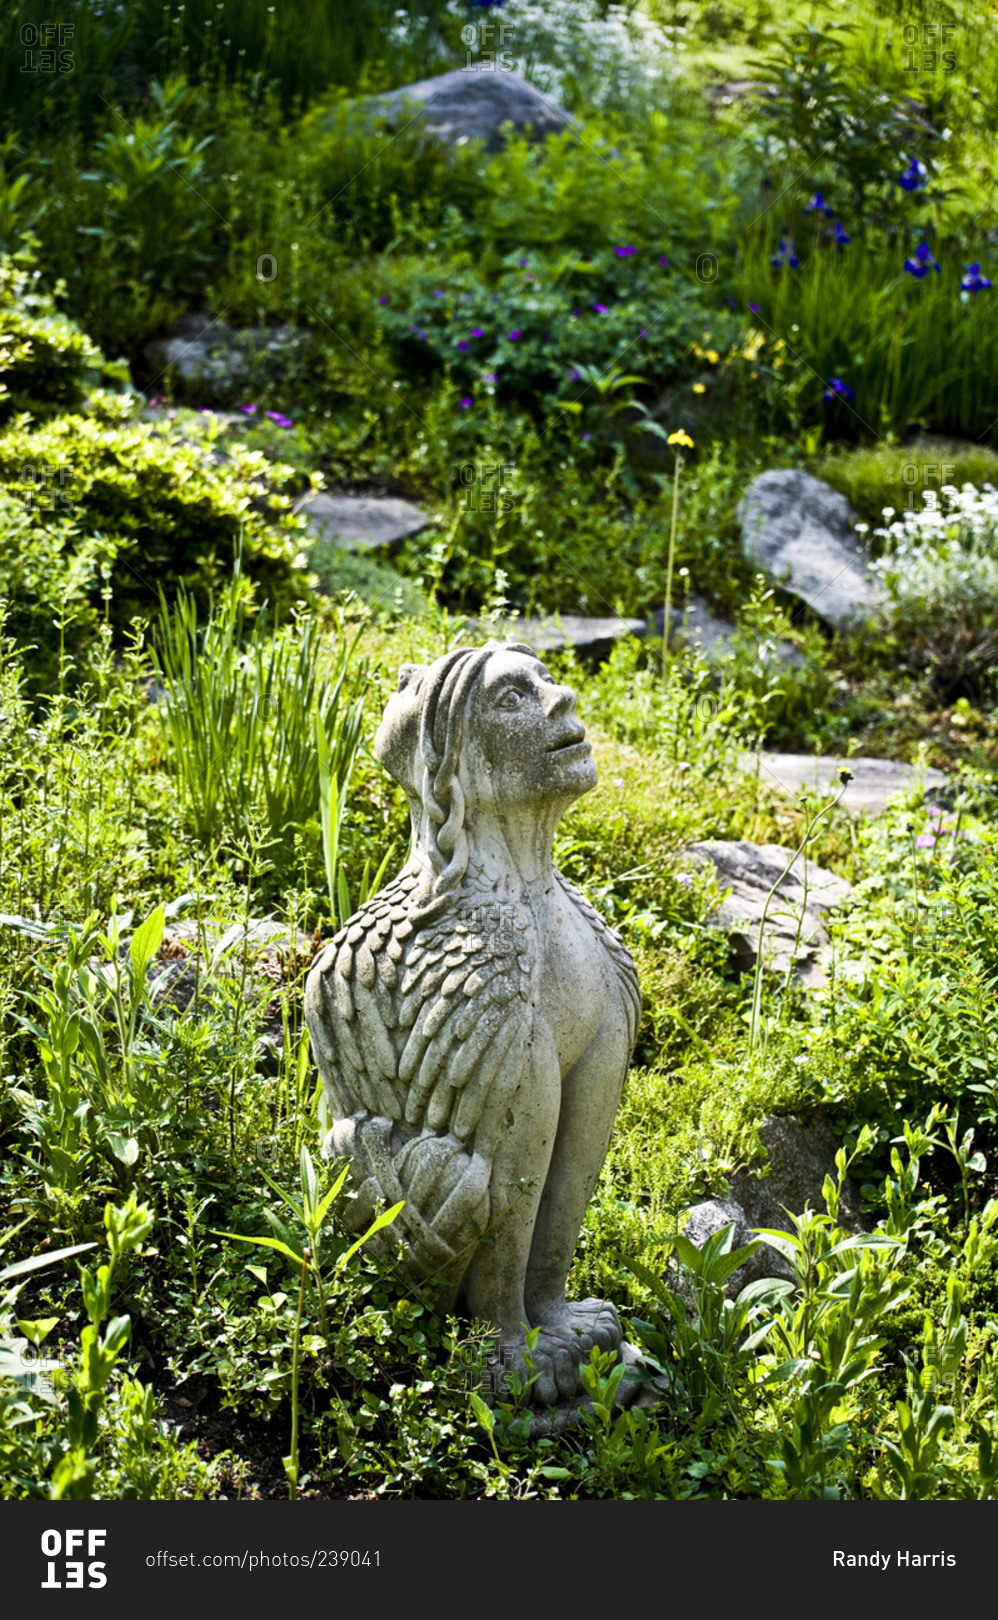 A two faced Sphinx sculpture in a garden